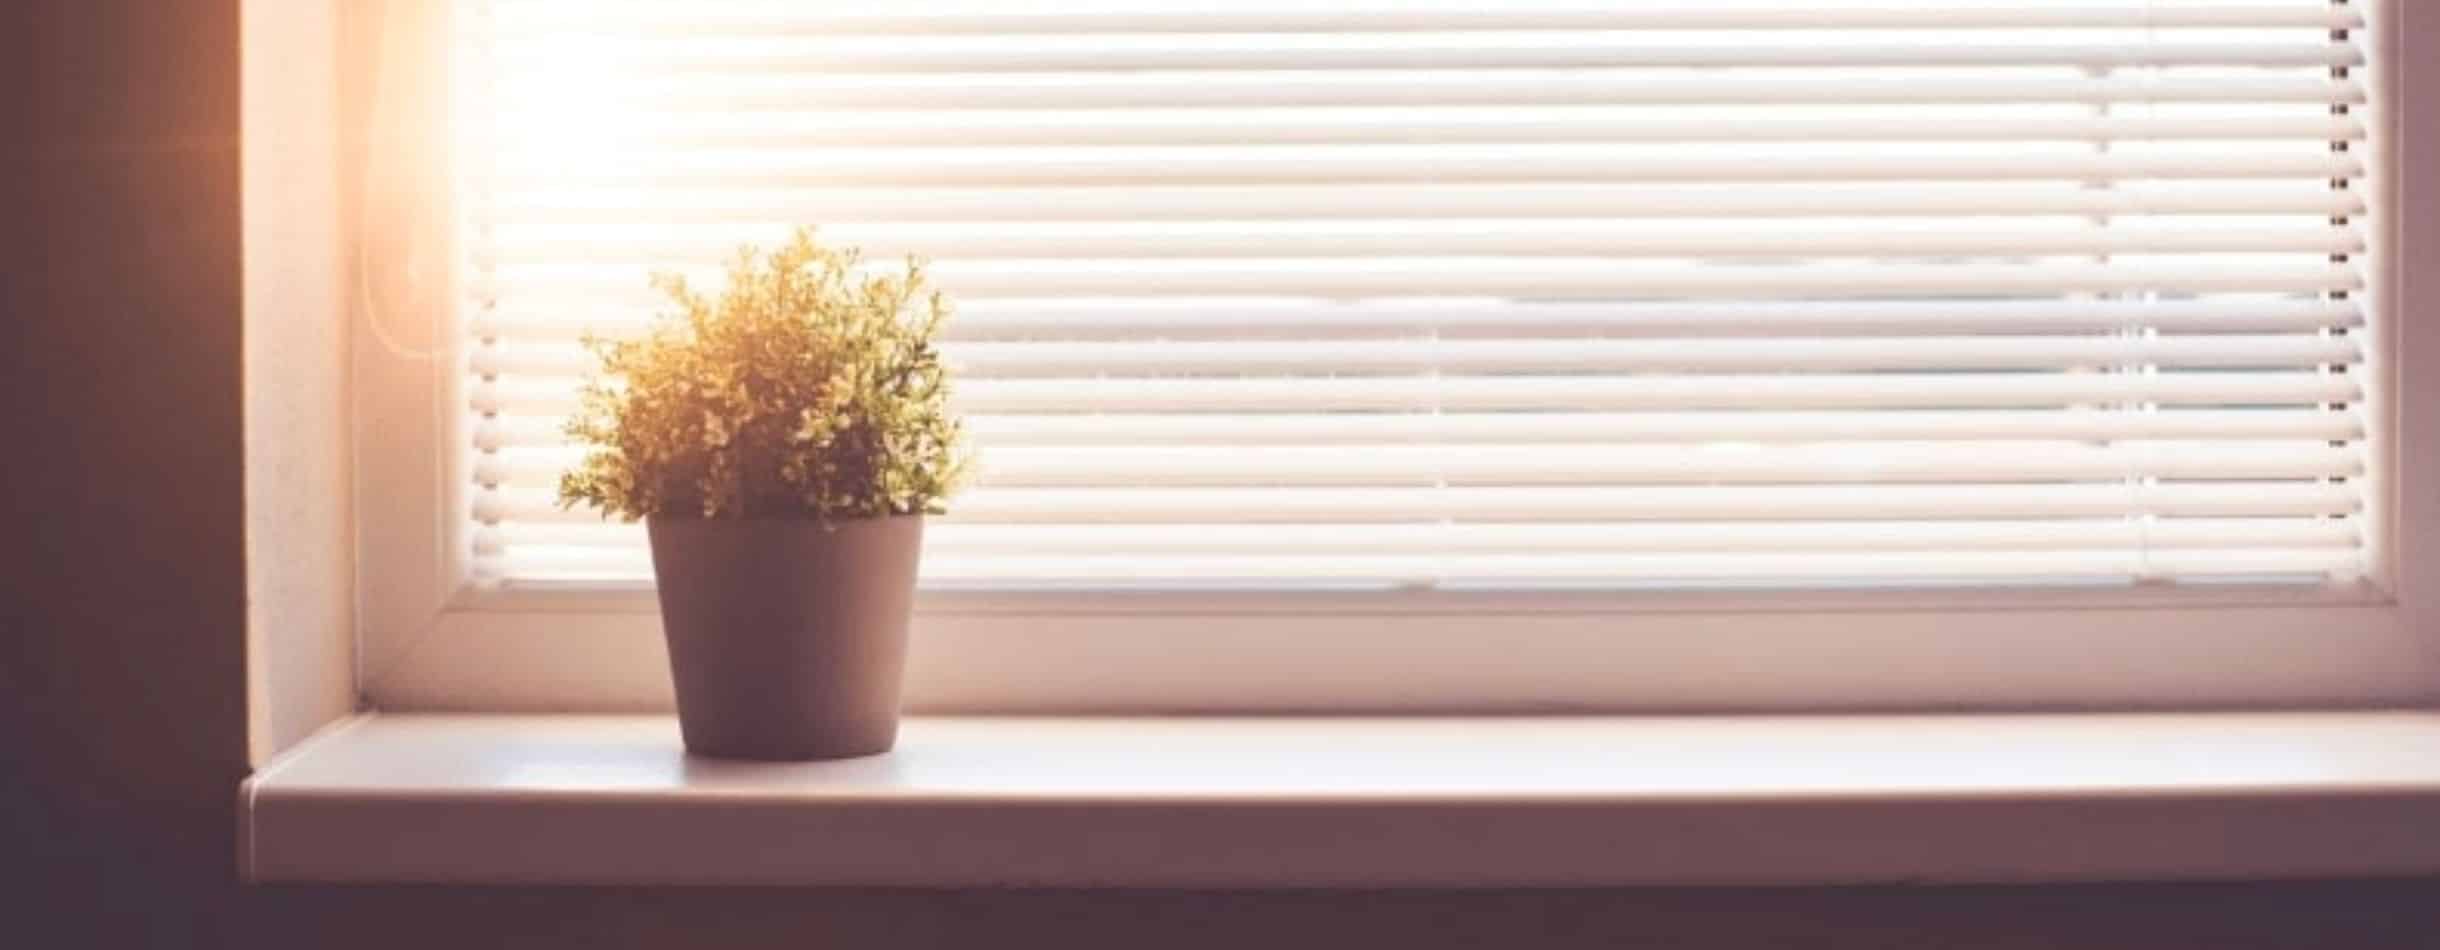 a potted plant sits on the windowsill as sun rays shine through the blinds